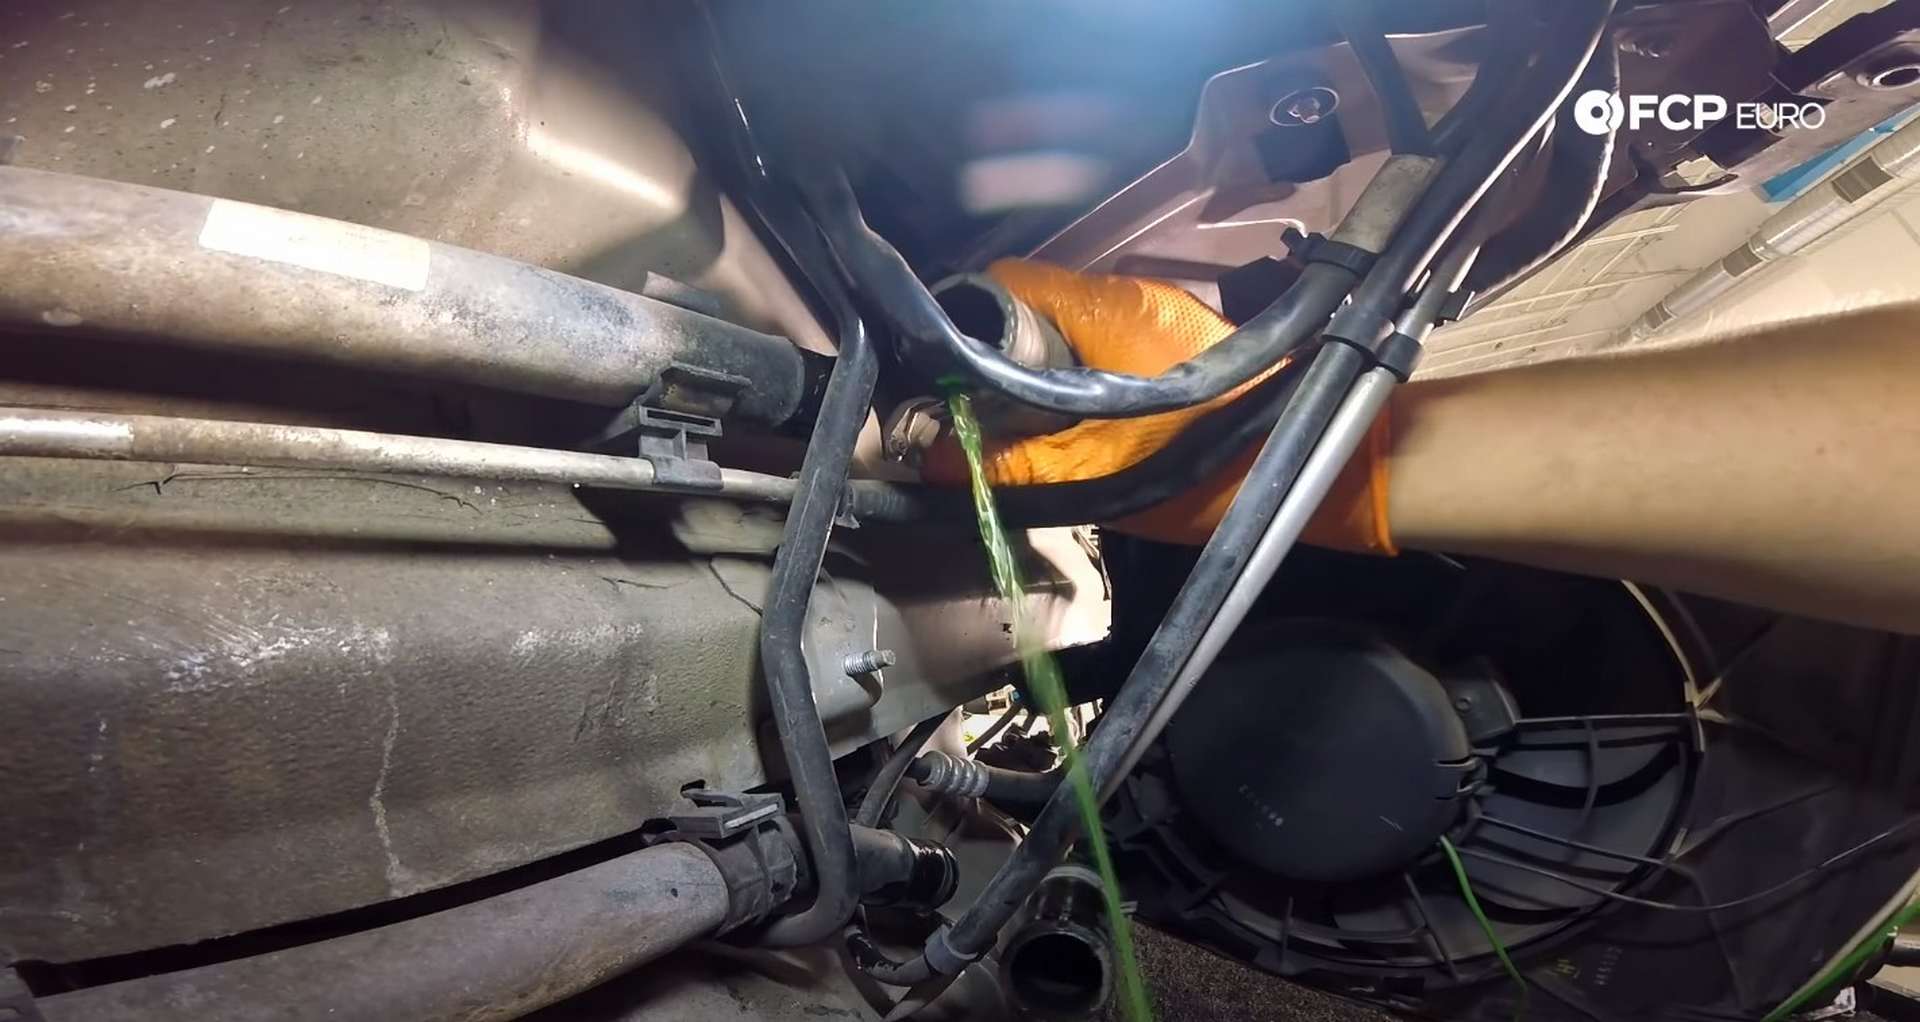 DIY Porsche 996 Radiator Replacement removing the coolant hoses